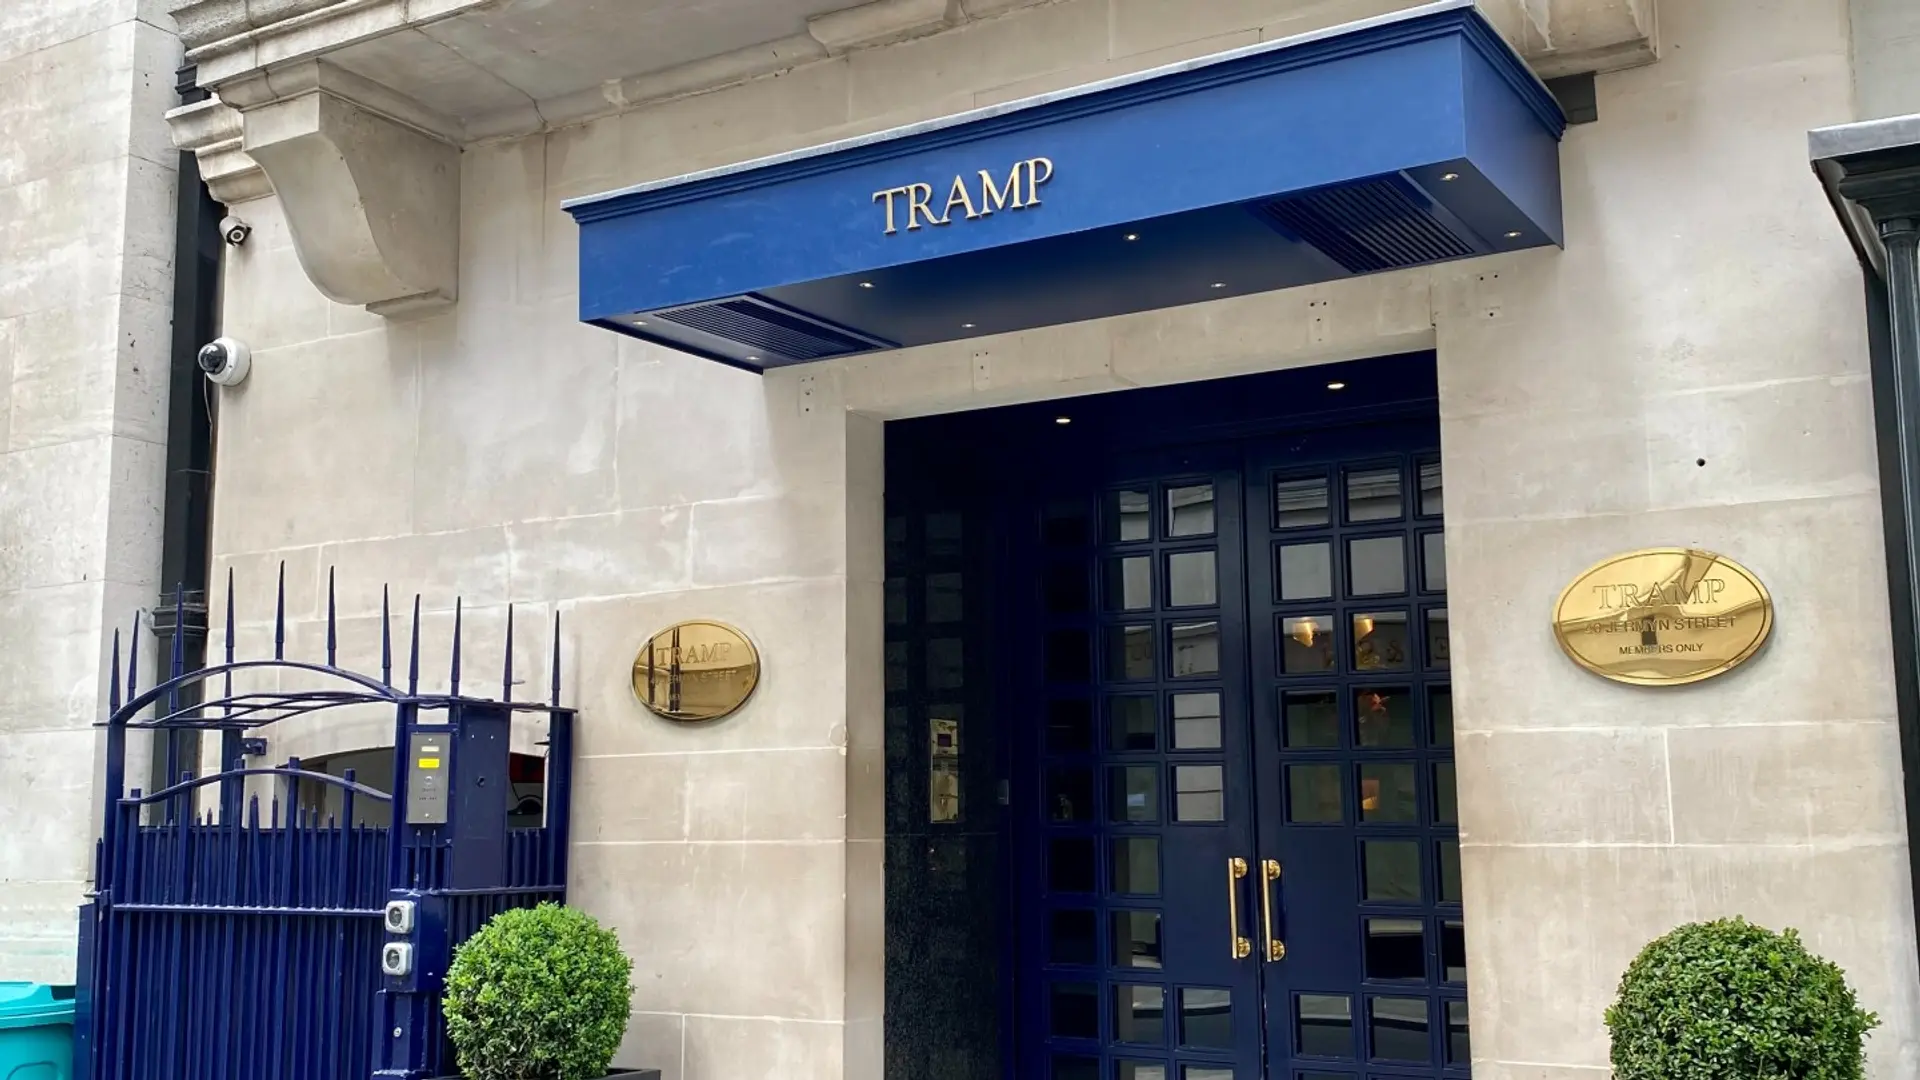 Tramp Private Member’s Club is one of the best private memebers club in london